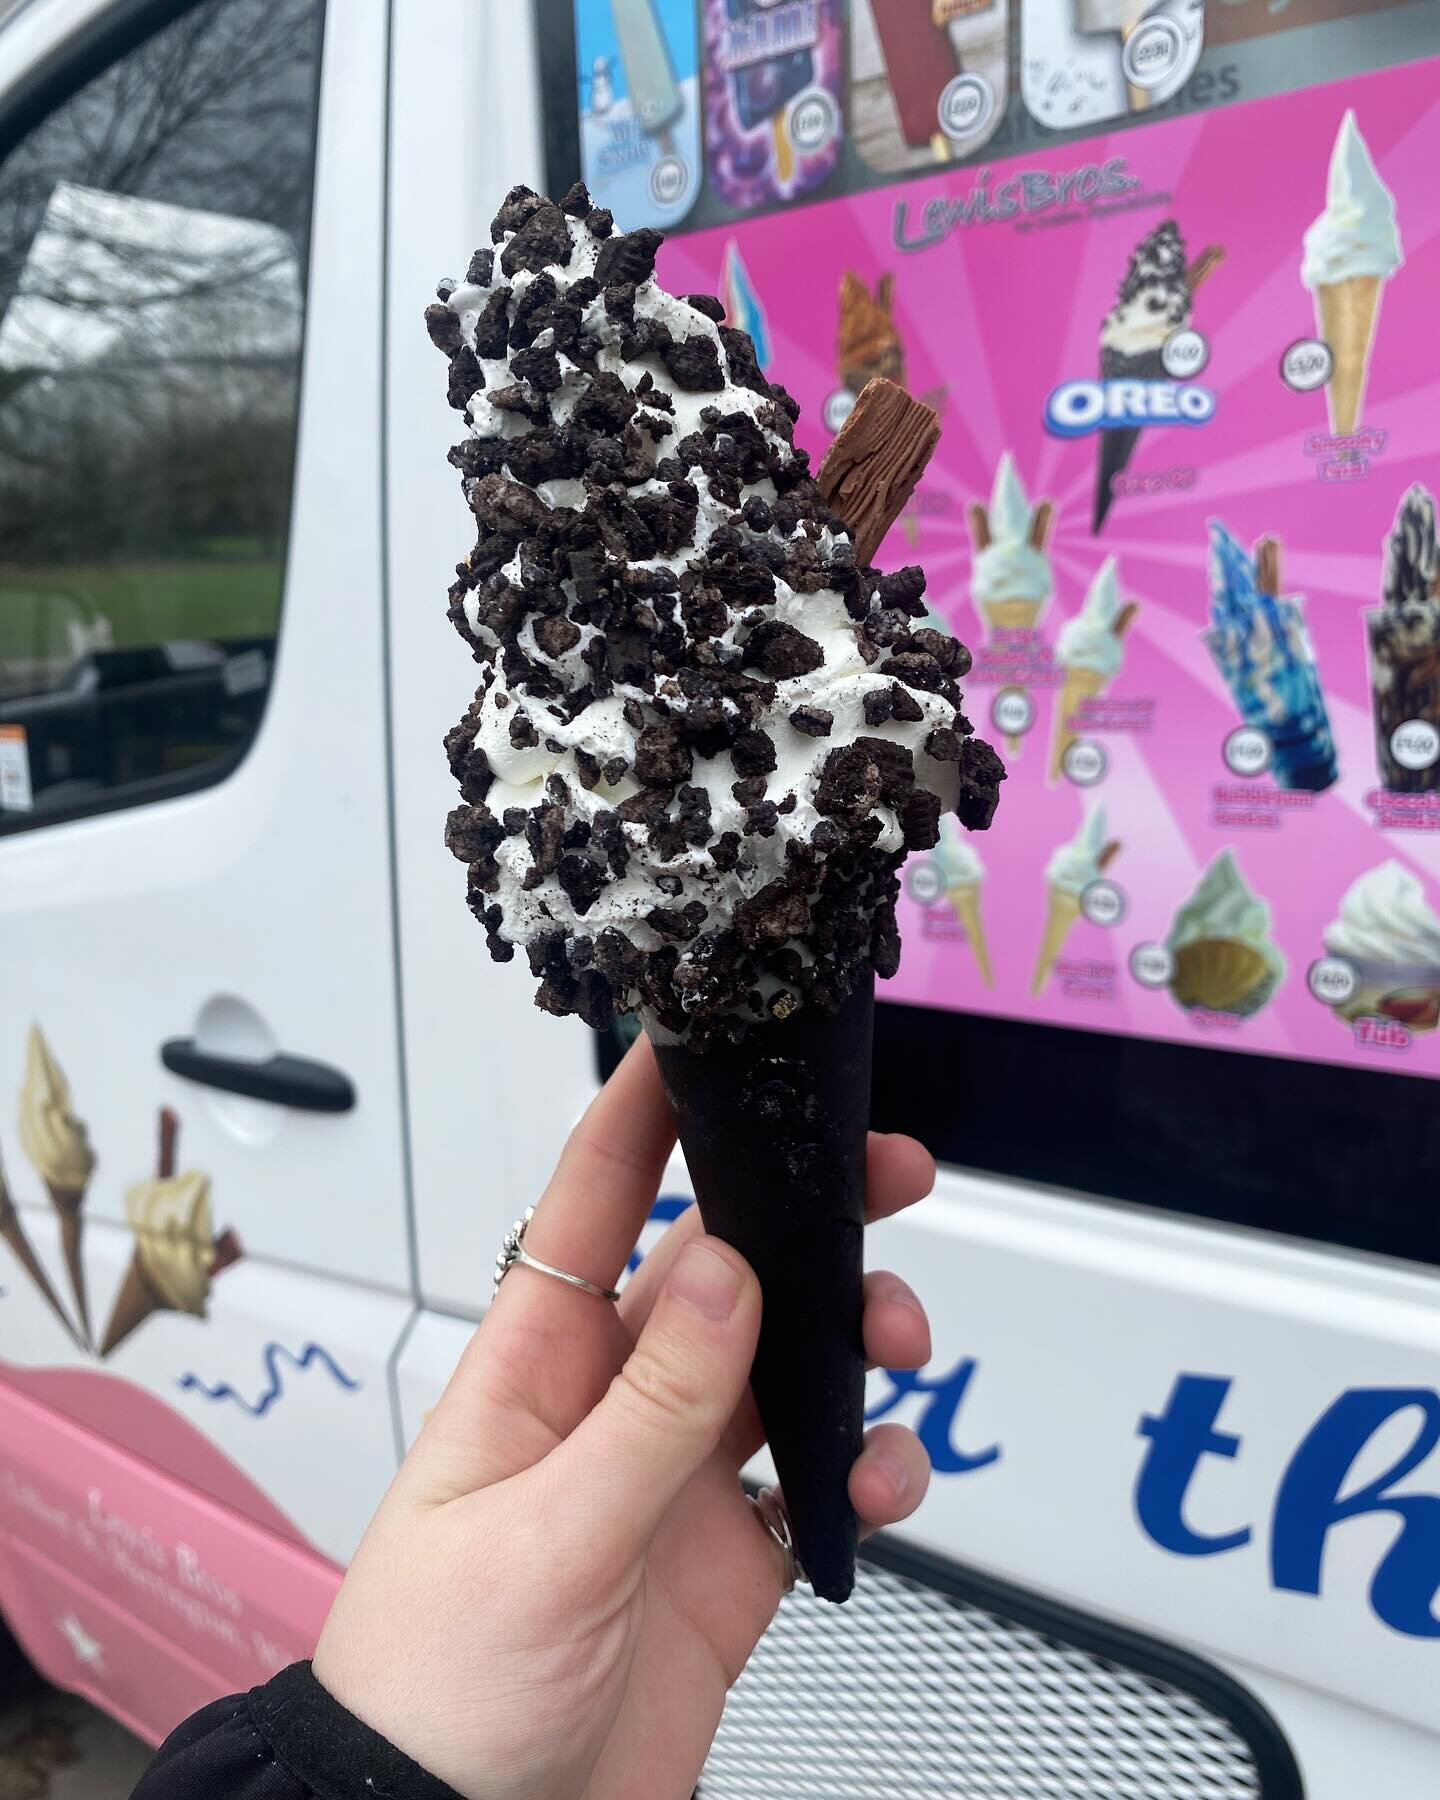 Who else is LOVES Oreo??
A cookie cone dipped in white chocolate and Oreo pieces, with ice cream that&rsquo;s covered in Oreo chunks and a flake. Add chocolate sauce to really get your chocolate cookie fix!!

#lewisbrosicecream #icecream #icecreamlov